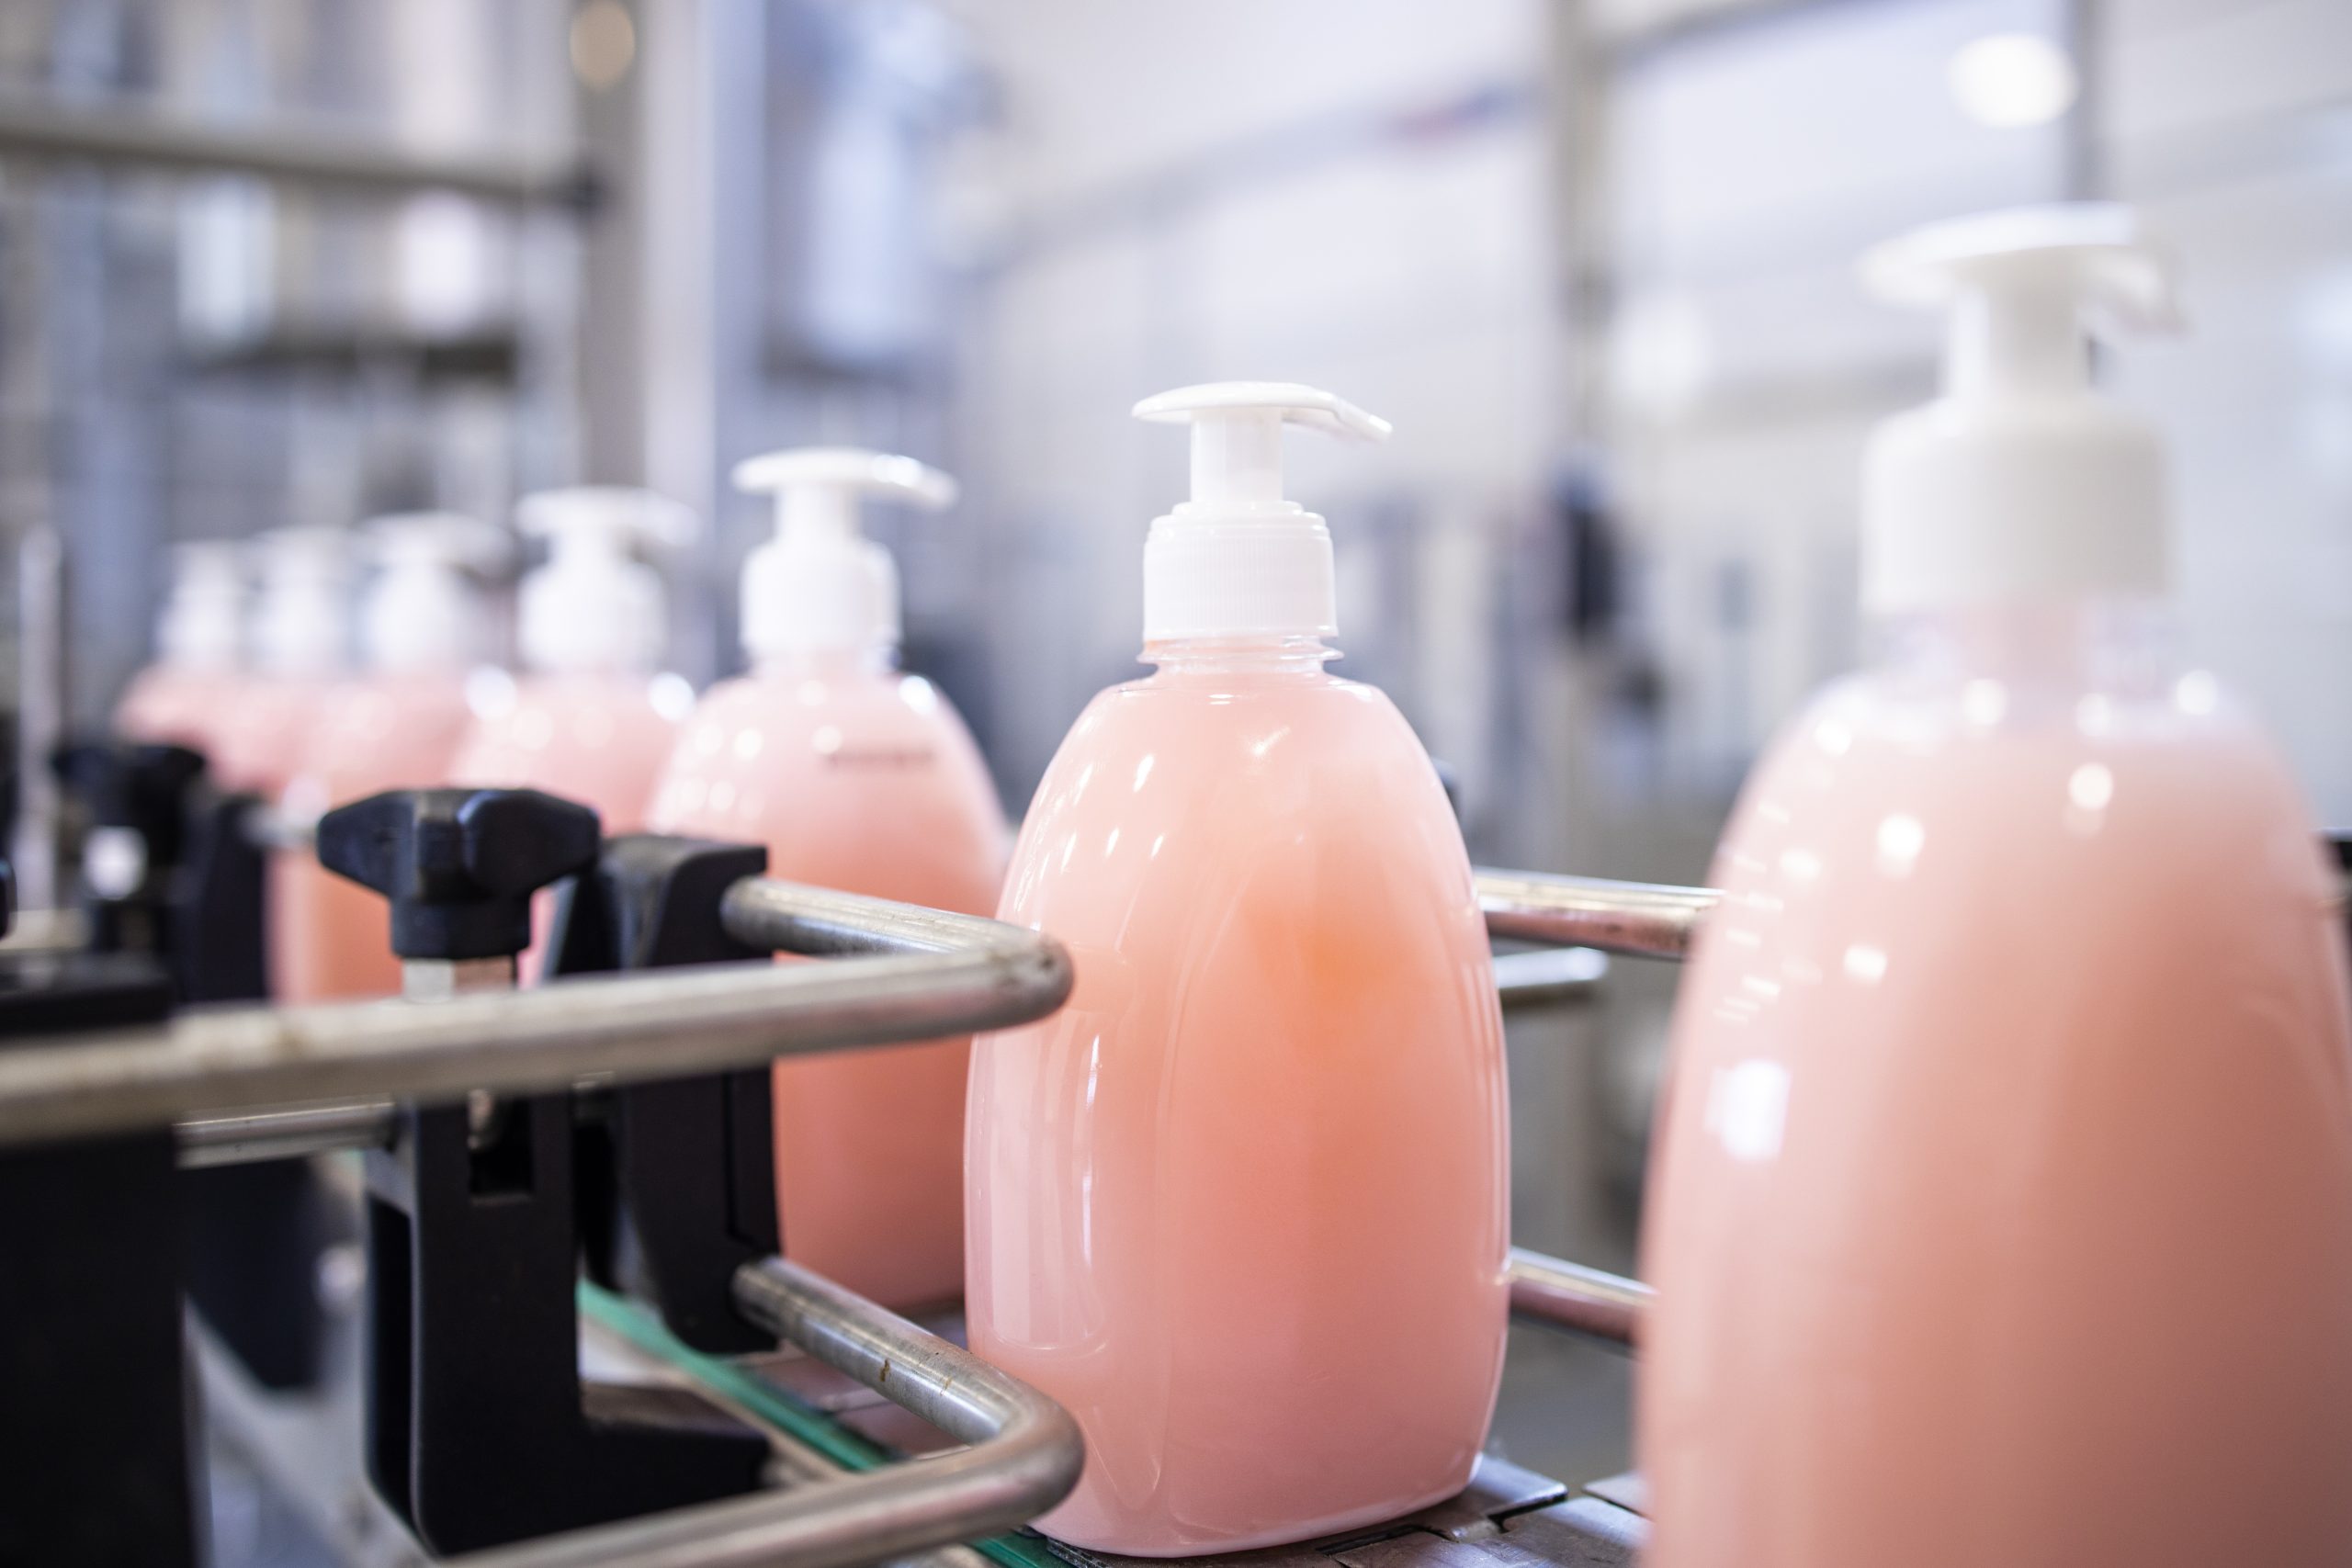 Bottled liquid soap being produced in factory.